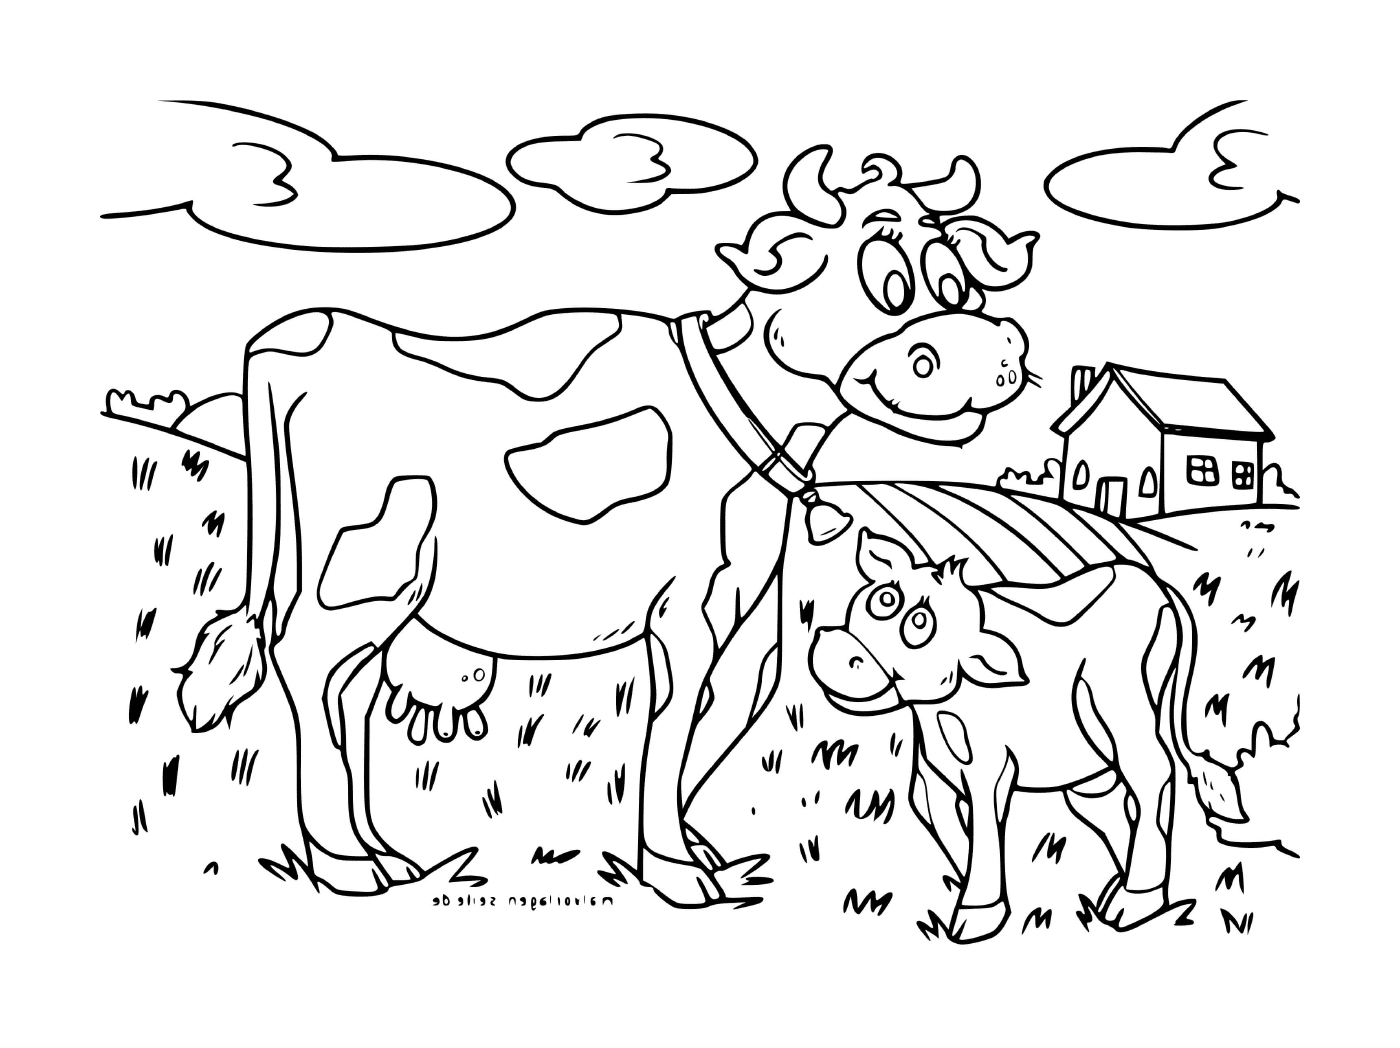  Cow and veal in a field 